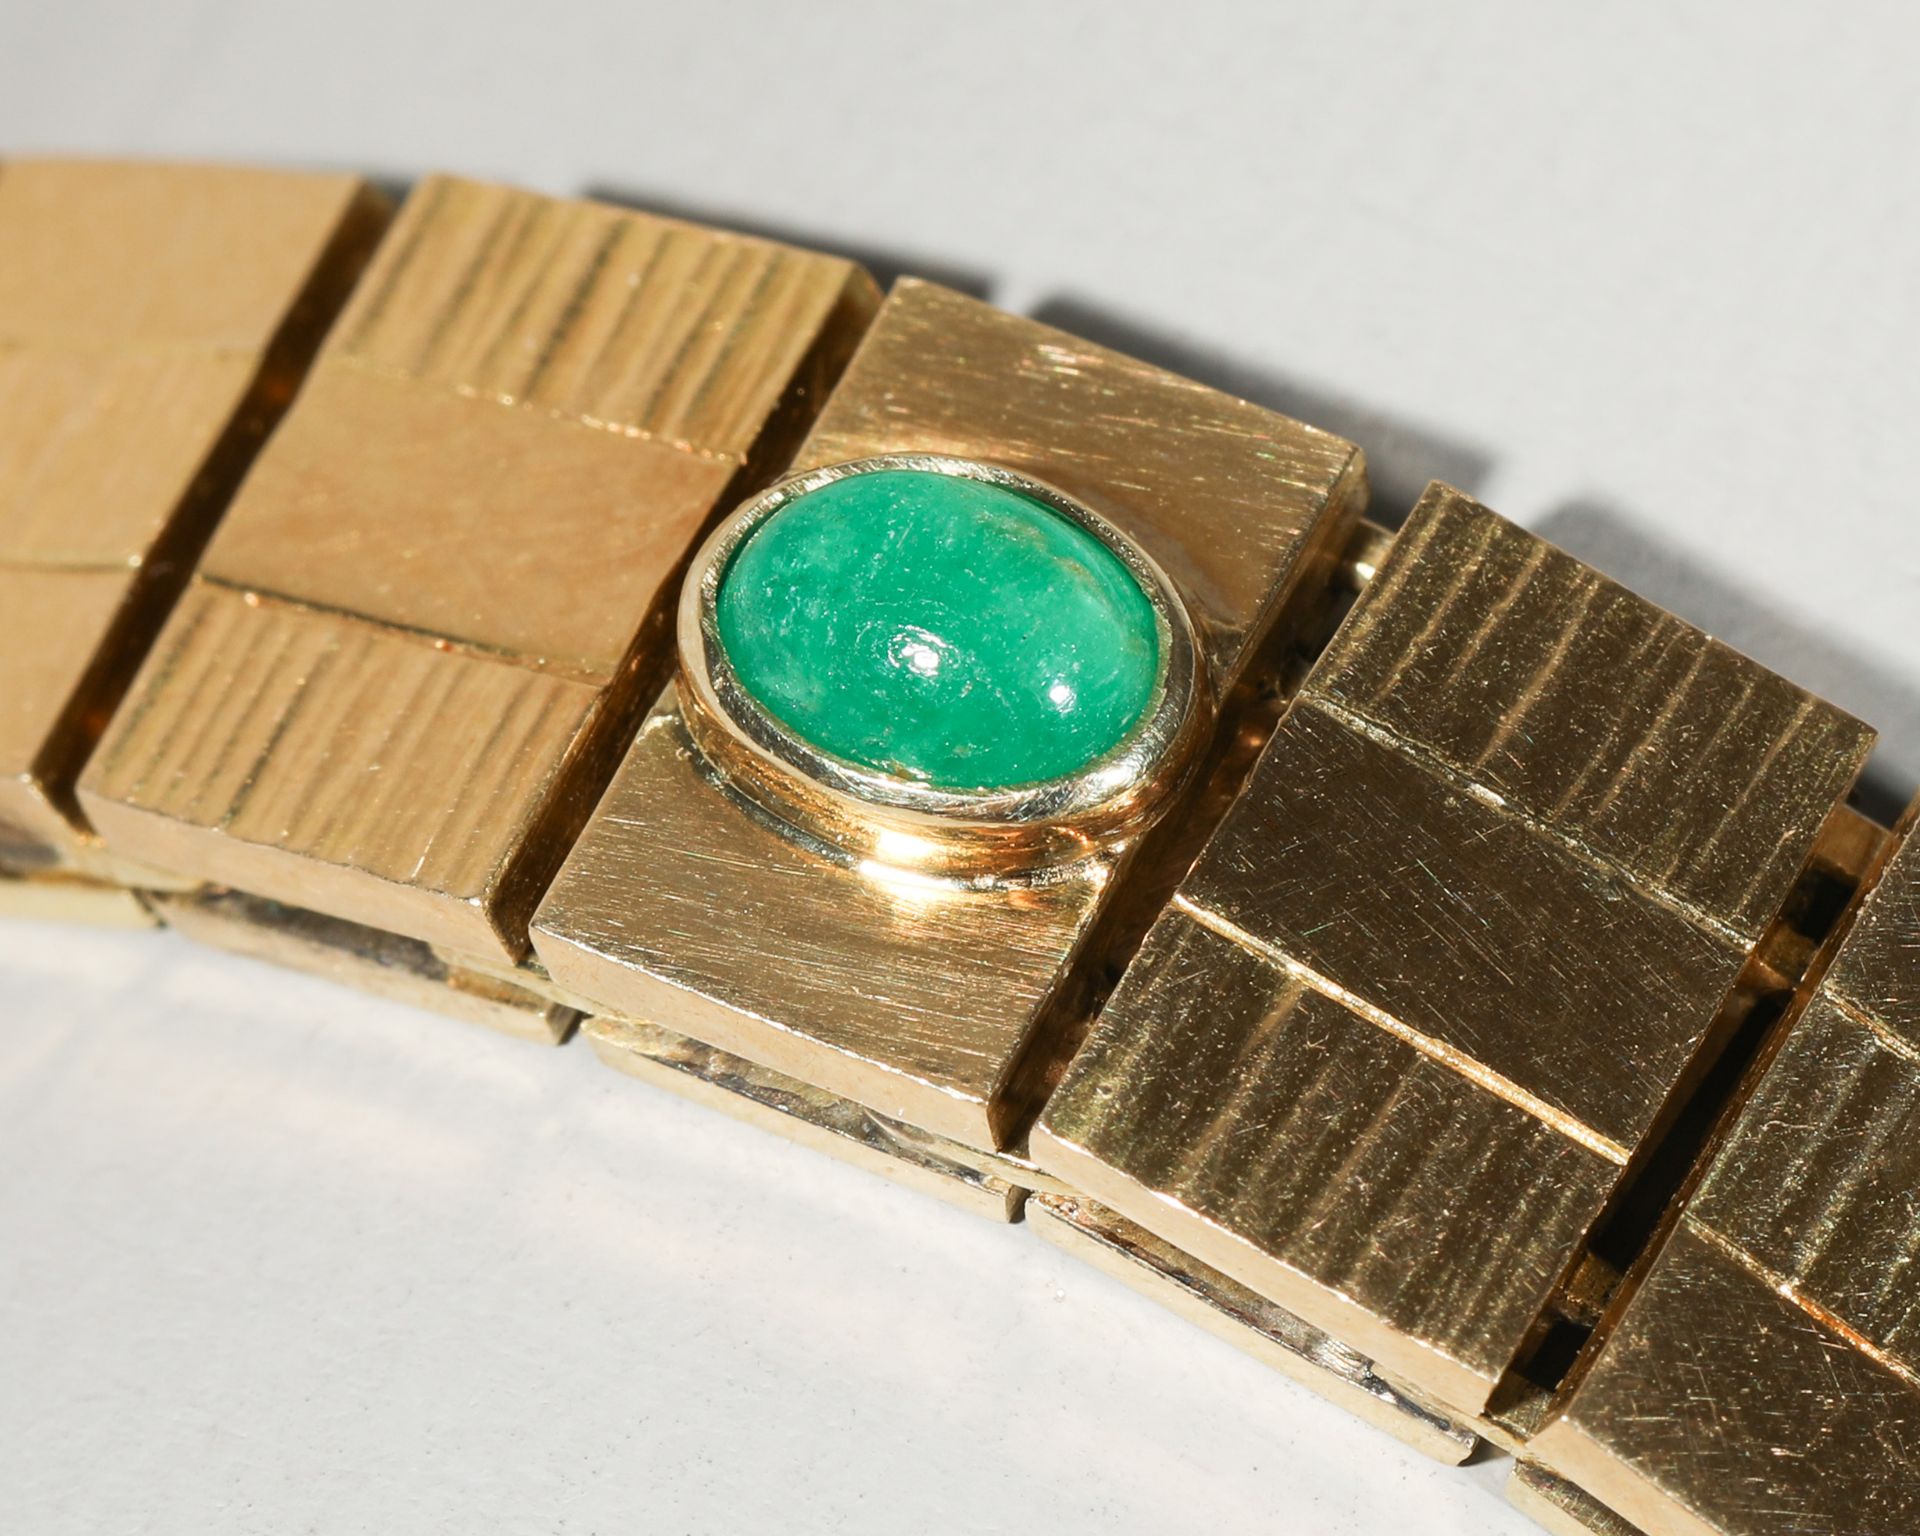 Gold bracelet with emerald cabochons - Image 2 of 7